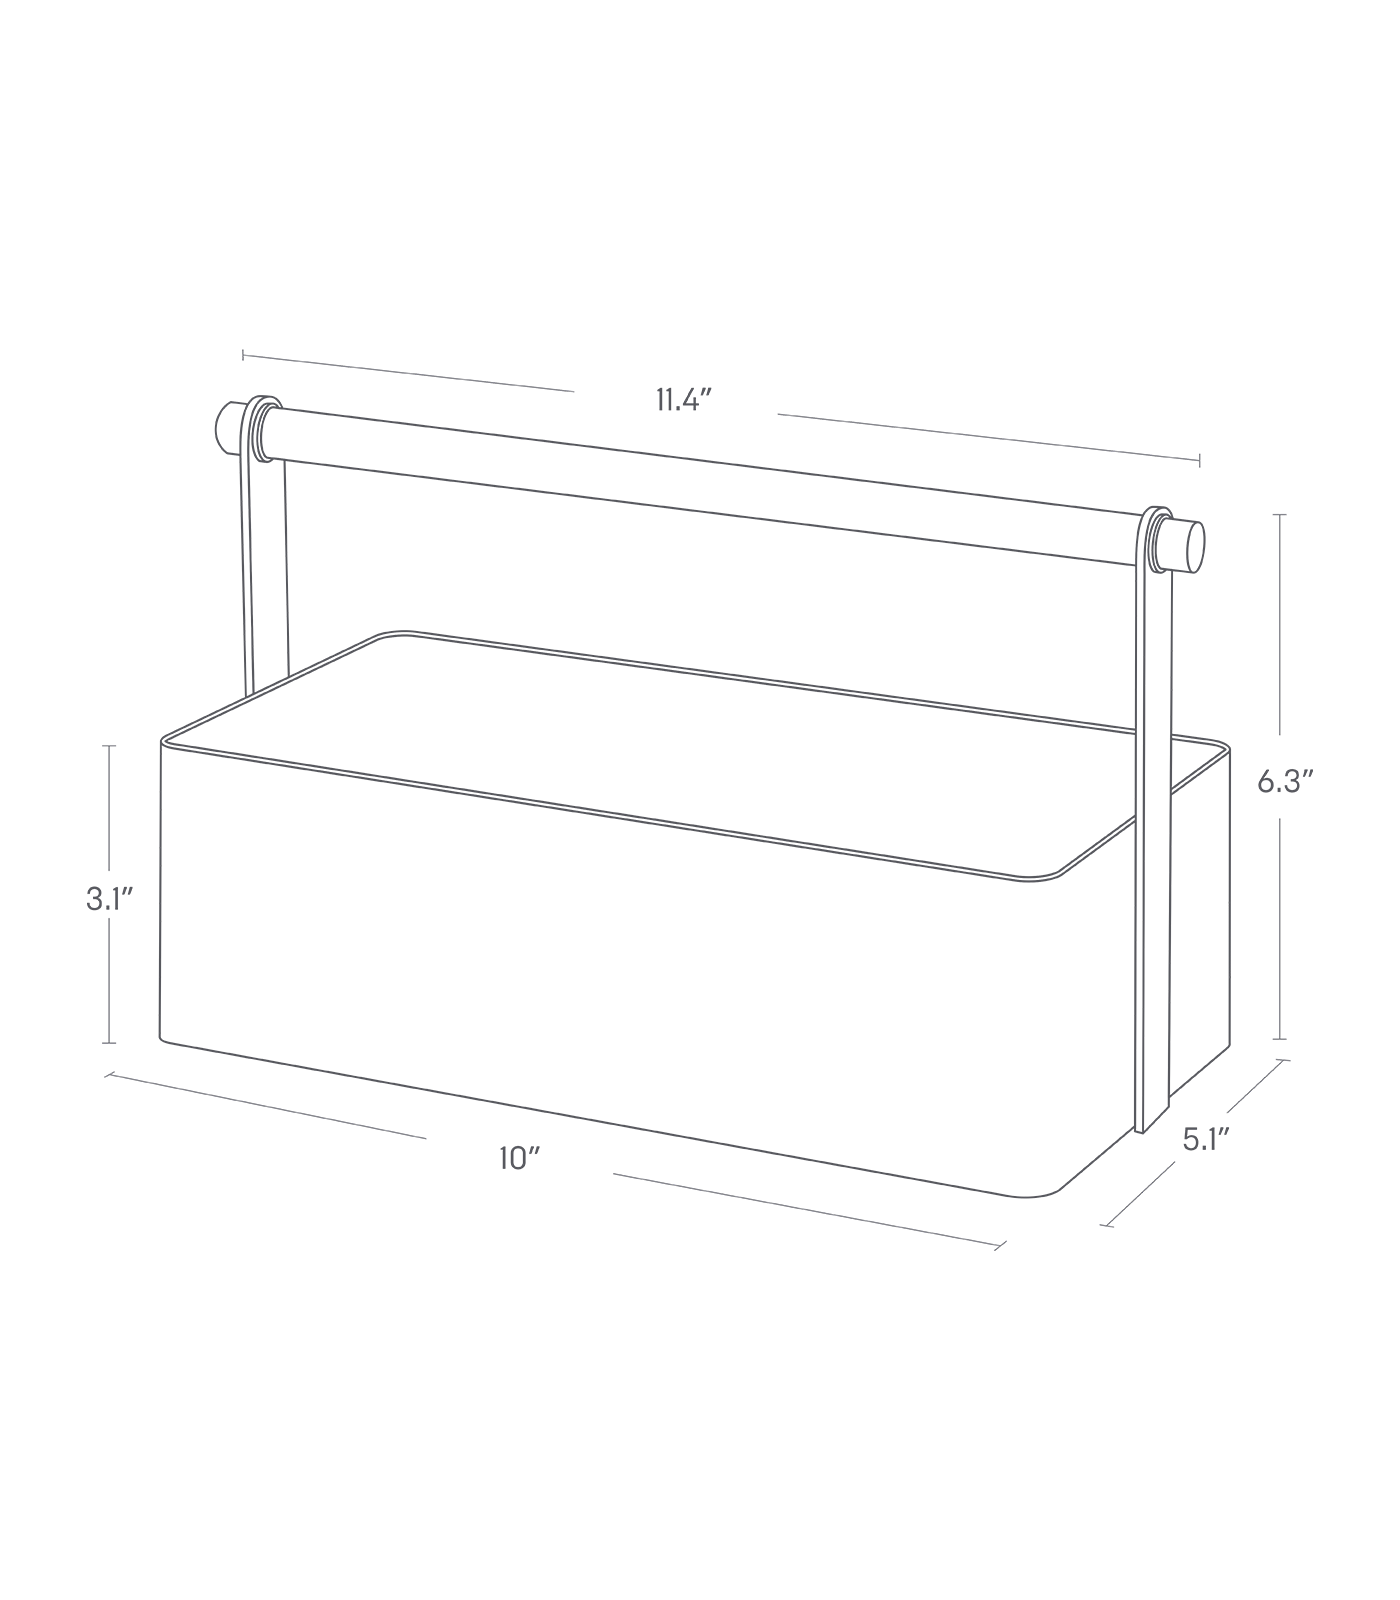 Dimension image for Storage Caddy - 2 Sizes on a white background including dimensions  L 5.12 x W 11.42 x H 6.3 inches